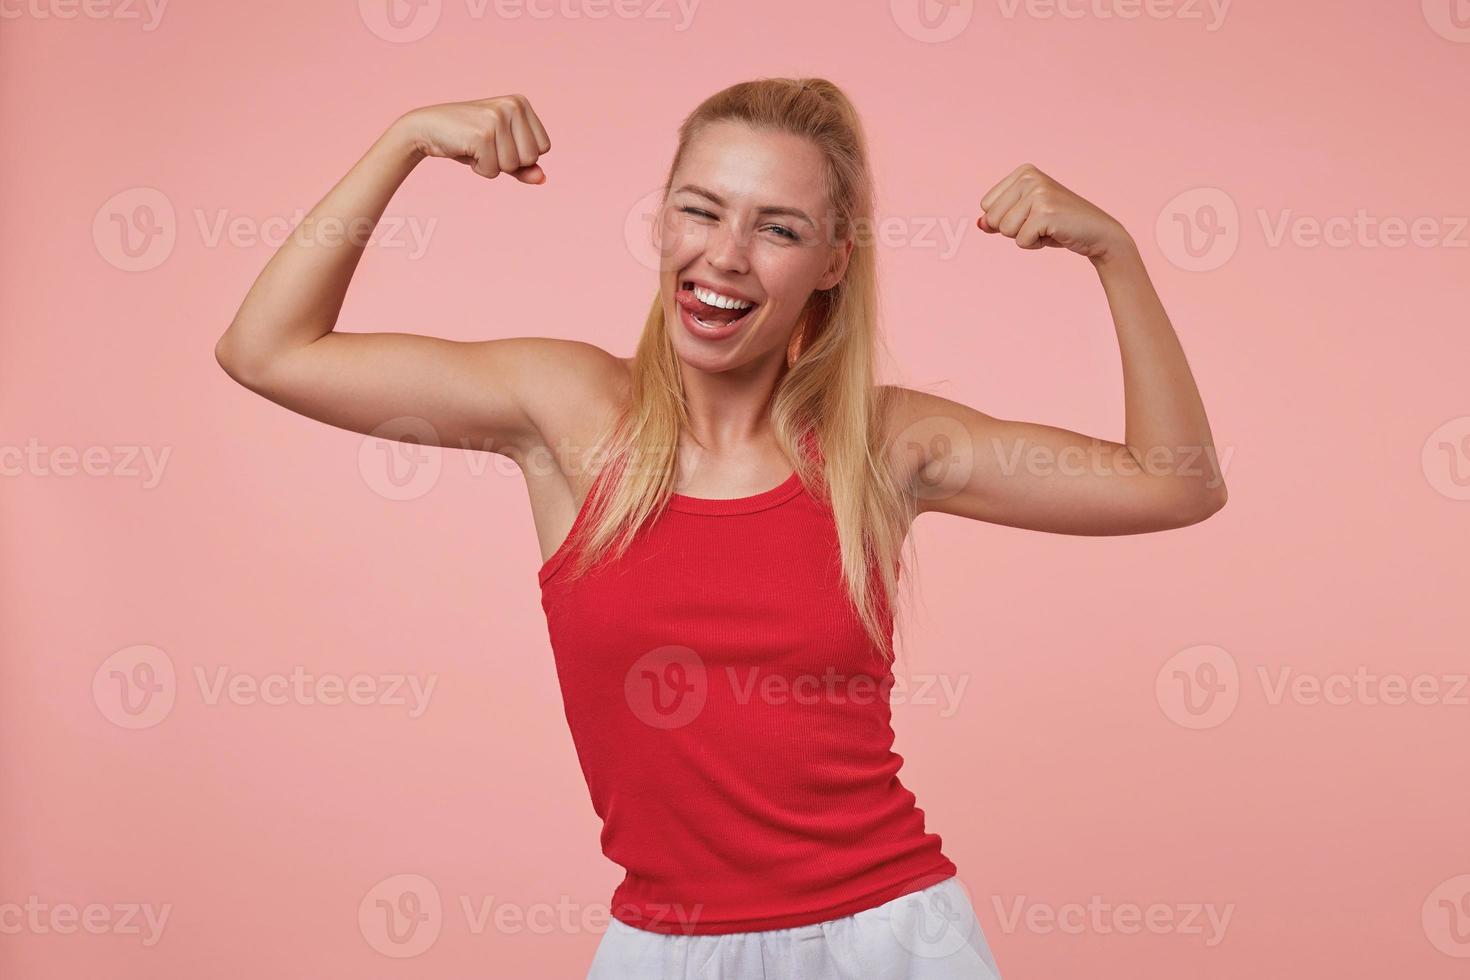 Cheerful good looking young woman with casual hairstyle showing her sporty hands, smiling widely, showing tongue and winking to camera, isolated over pink background photo